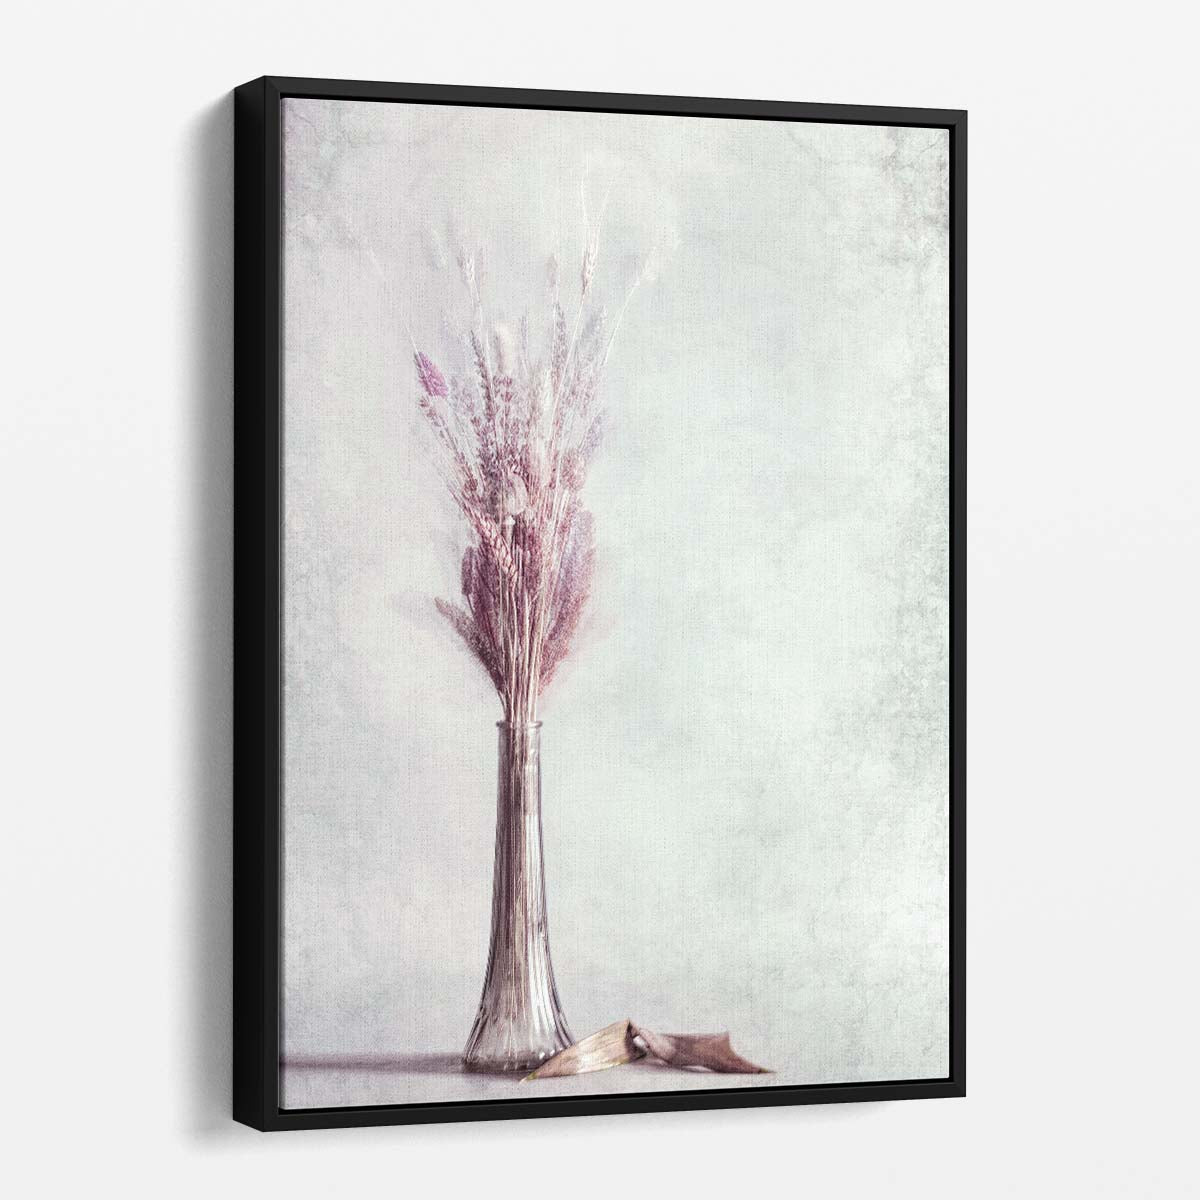 Botanical Photography Soft pink floral still life with creative double exposure by Luxuriance Designs, made in USA